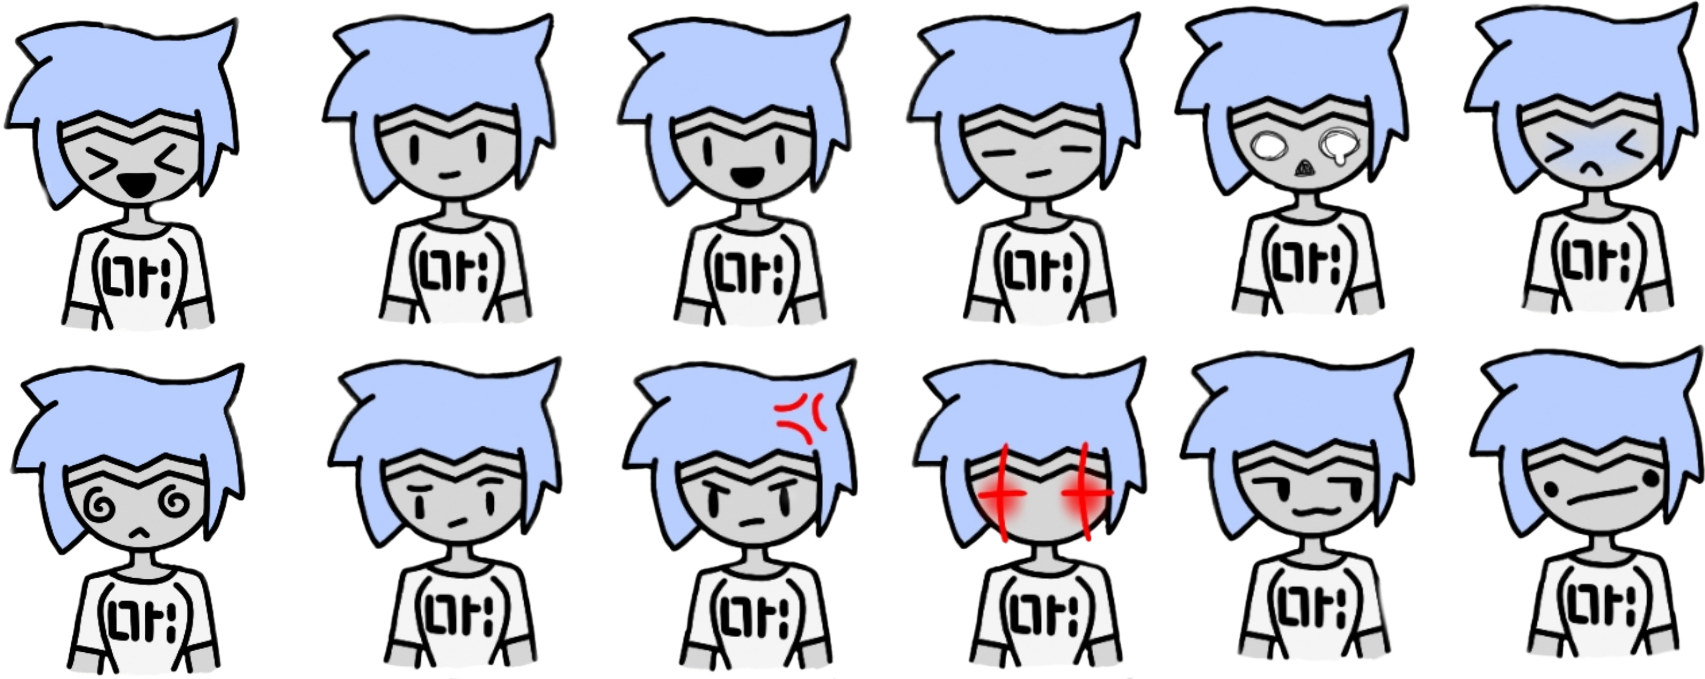 Astra expression sheet updated Blank Template - Imgflip